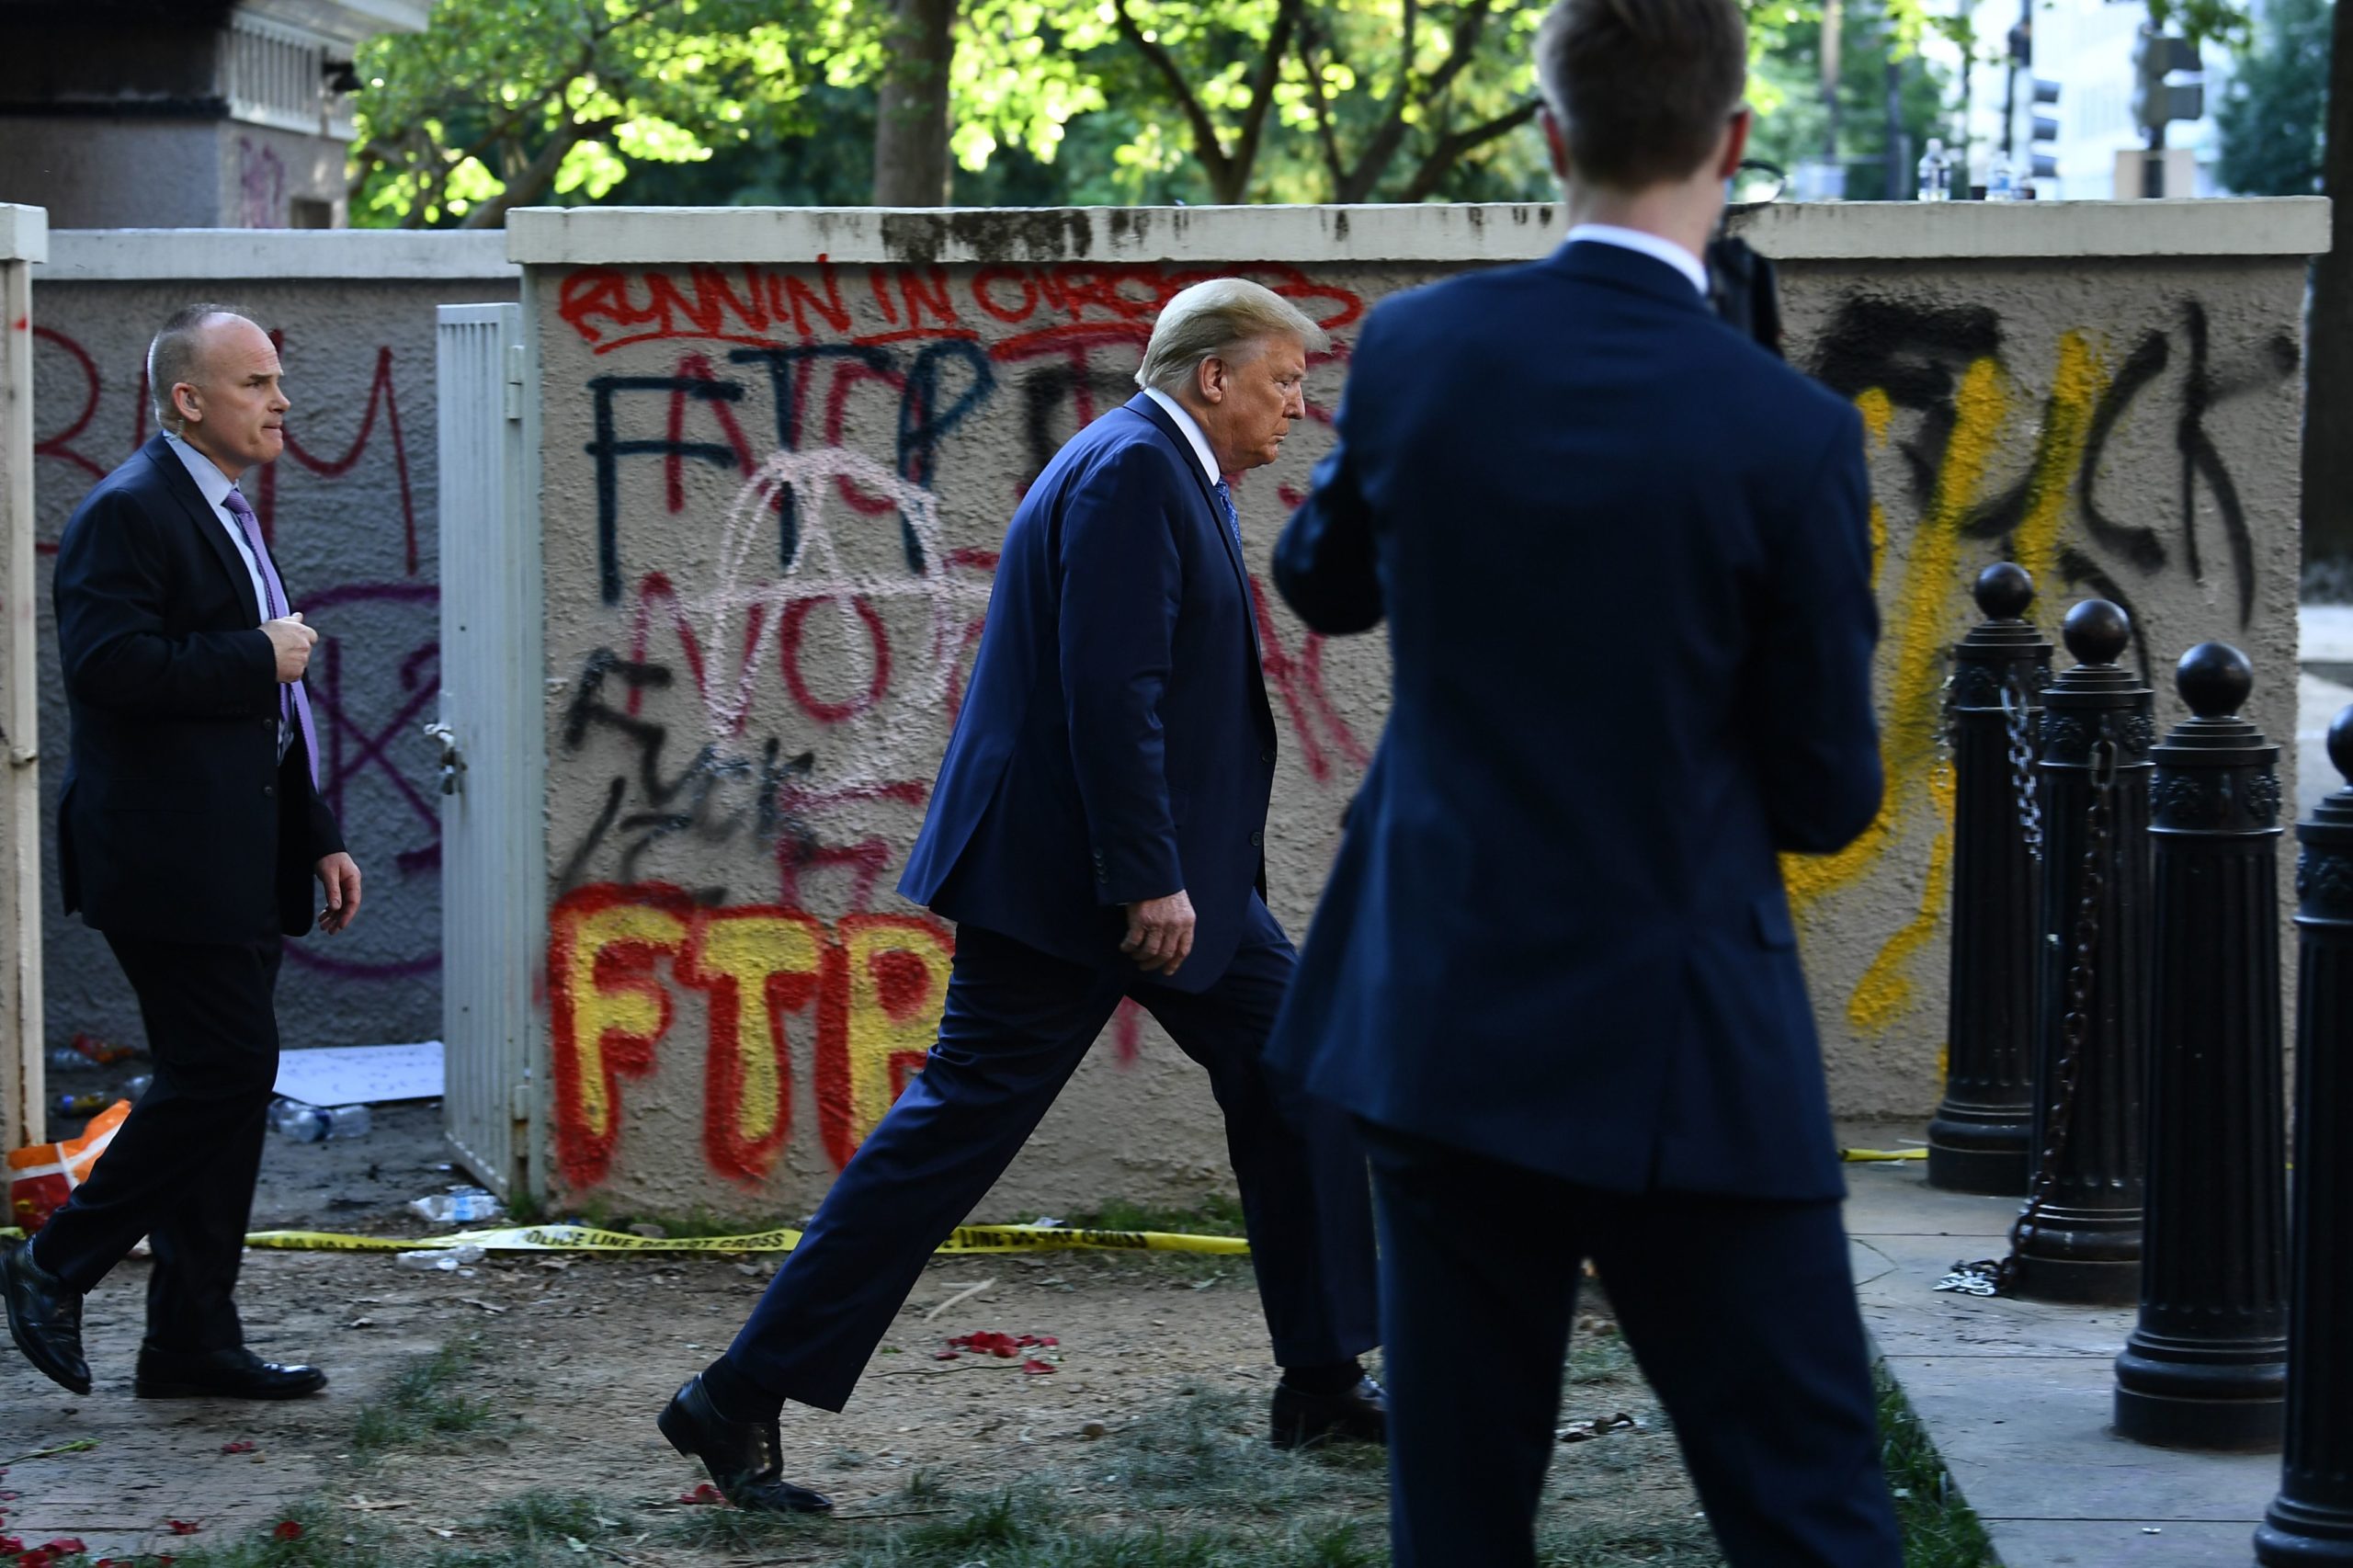 US President Donald Trump walks back to the White House escorted by the Secret Service after appearing outside of St John's Episcopal church across Lafayette Park in Washington, DC on June 1, 2020. - US President Donald Trump was due to make a televised address to the nation on Monday after days of anti-racism protests against police brutality that have erupted into violence. The White House announced that the president would make remarks imminently after he has been criticized for not publicly addressing in the crisis in recent days. (Photo by Brendan Smialowski / AFP) (Photo by BRENDAN SMIALOWSKI/AFP via Getty Images)